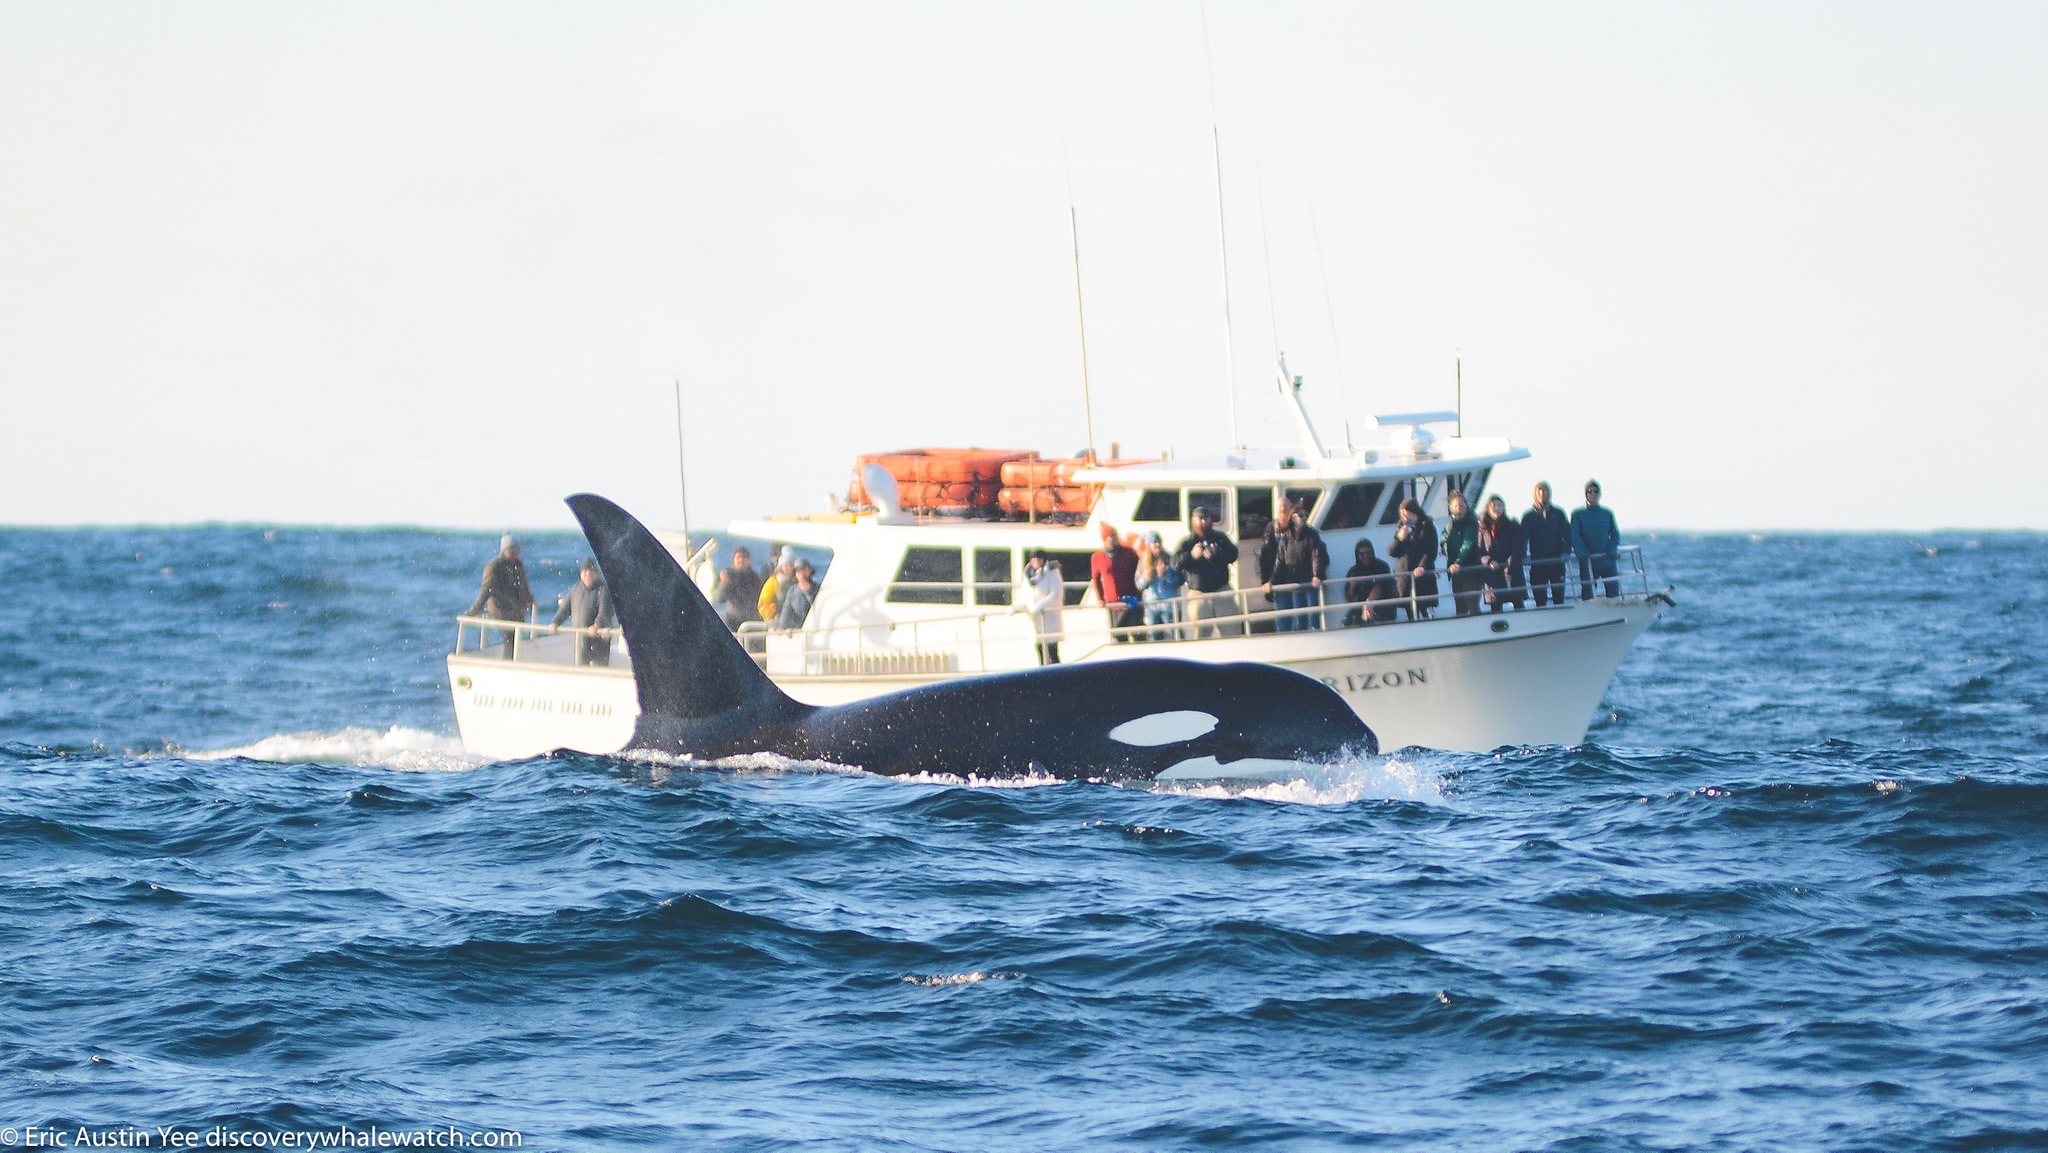 witless bay whale watching tours